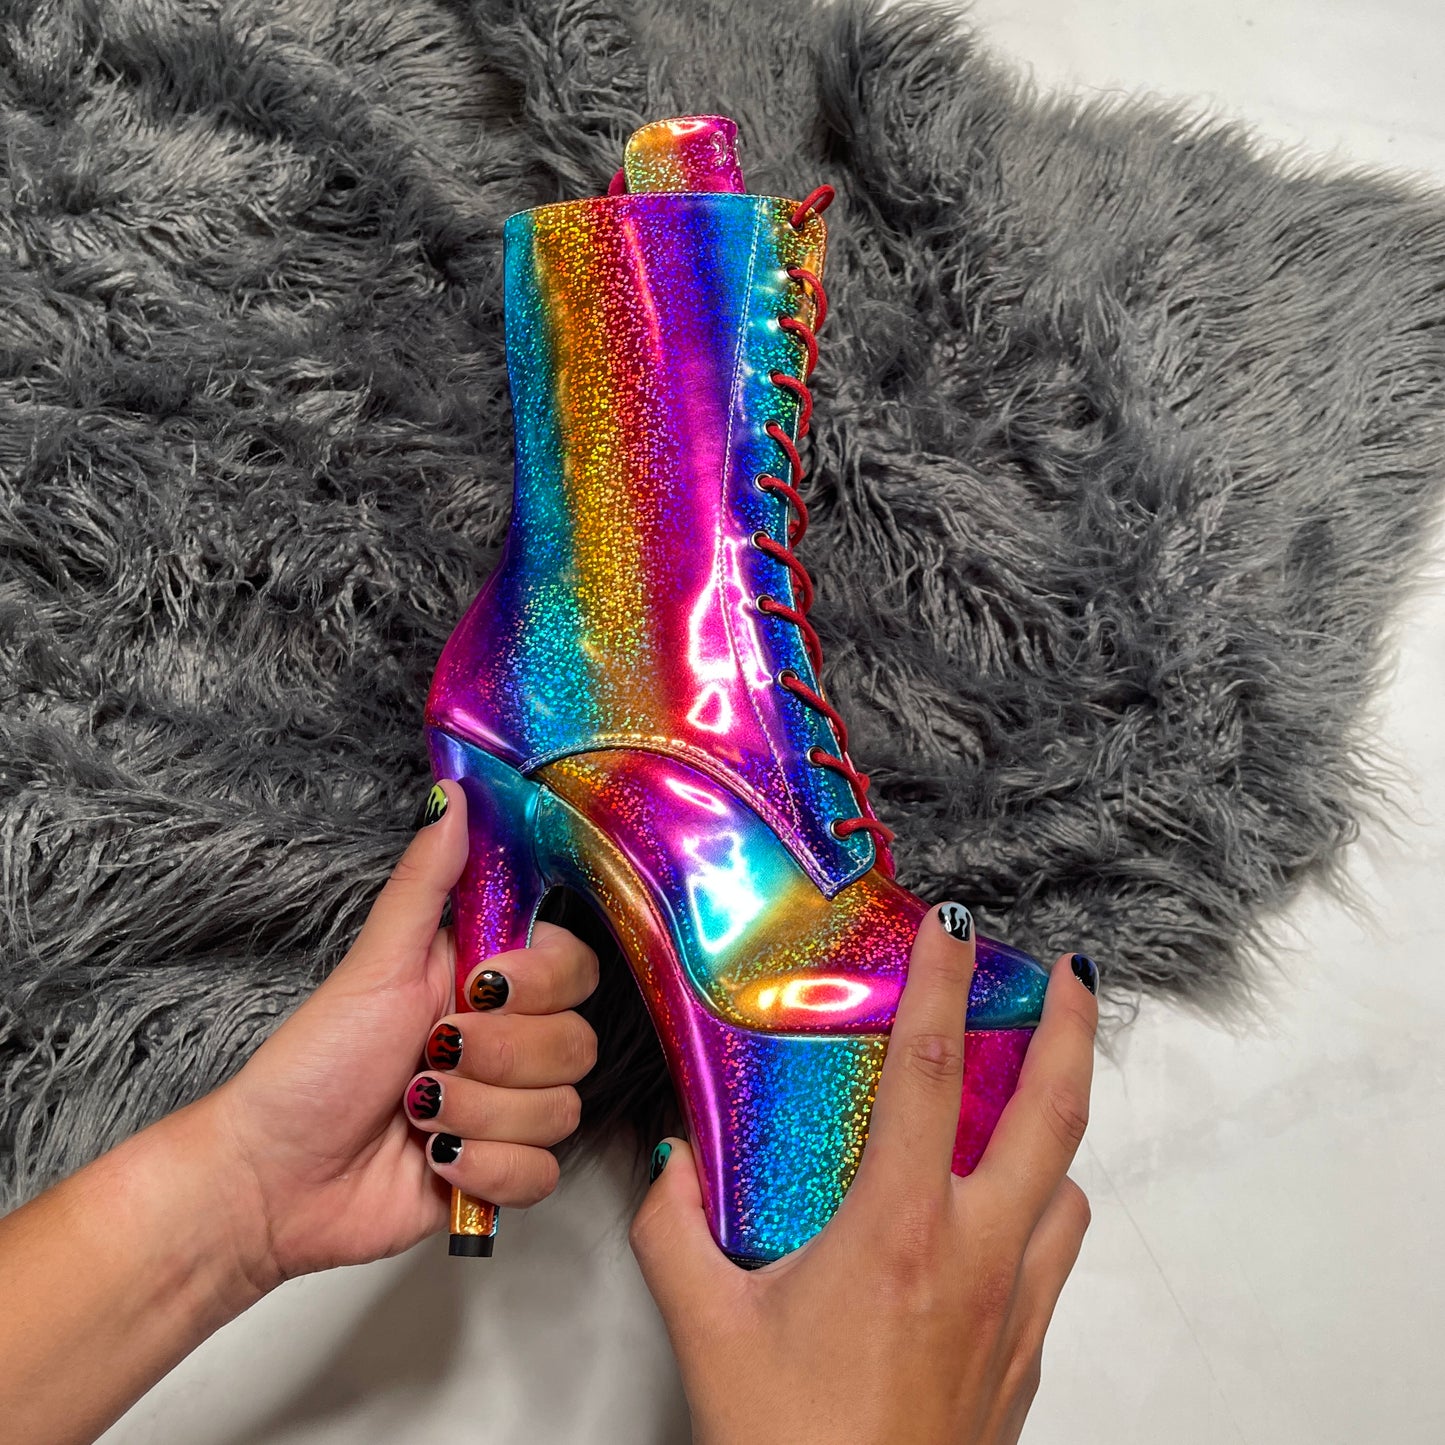 Pride Boot Limited Edition - 7 INCH